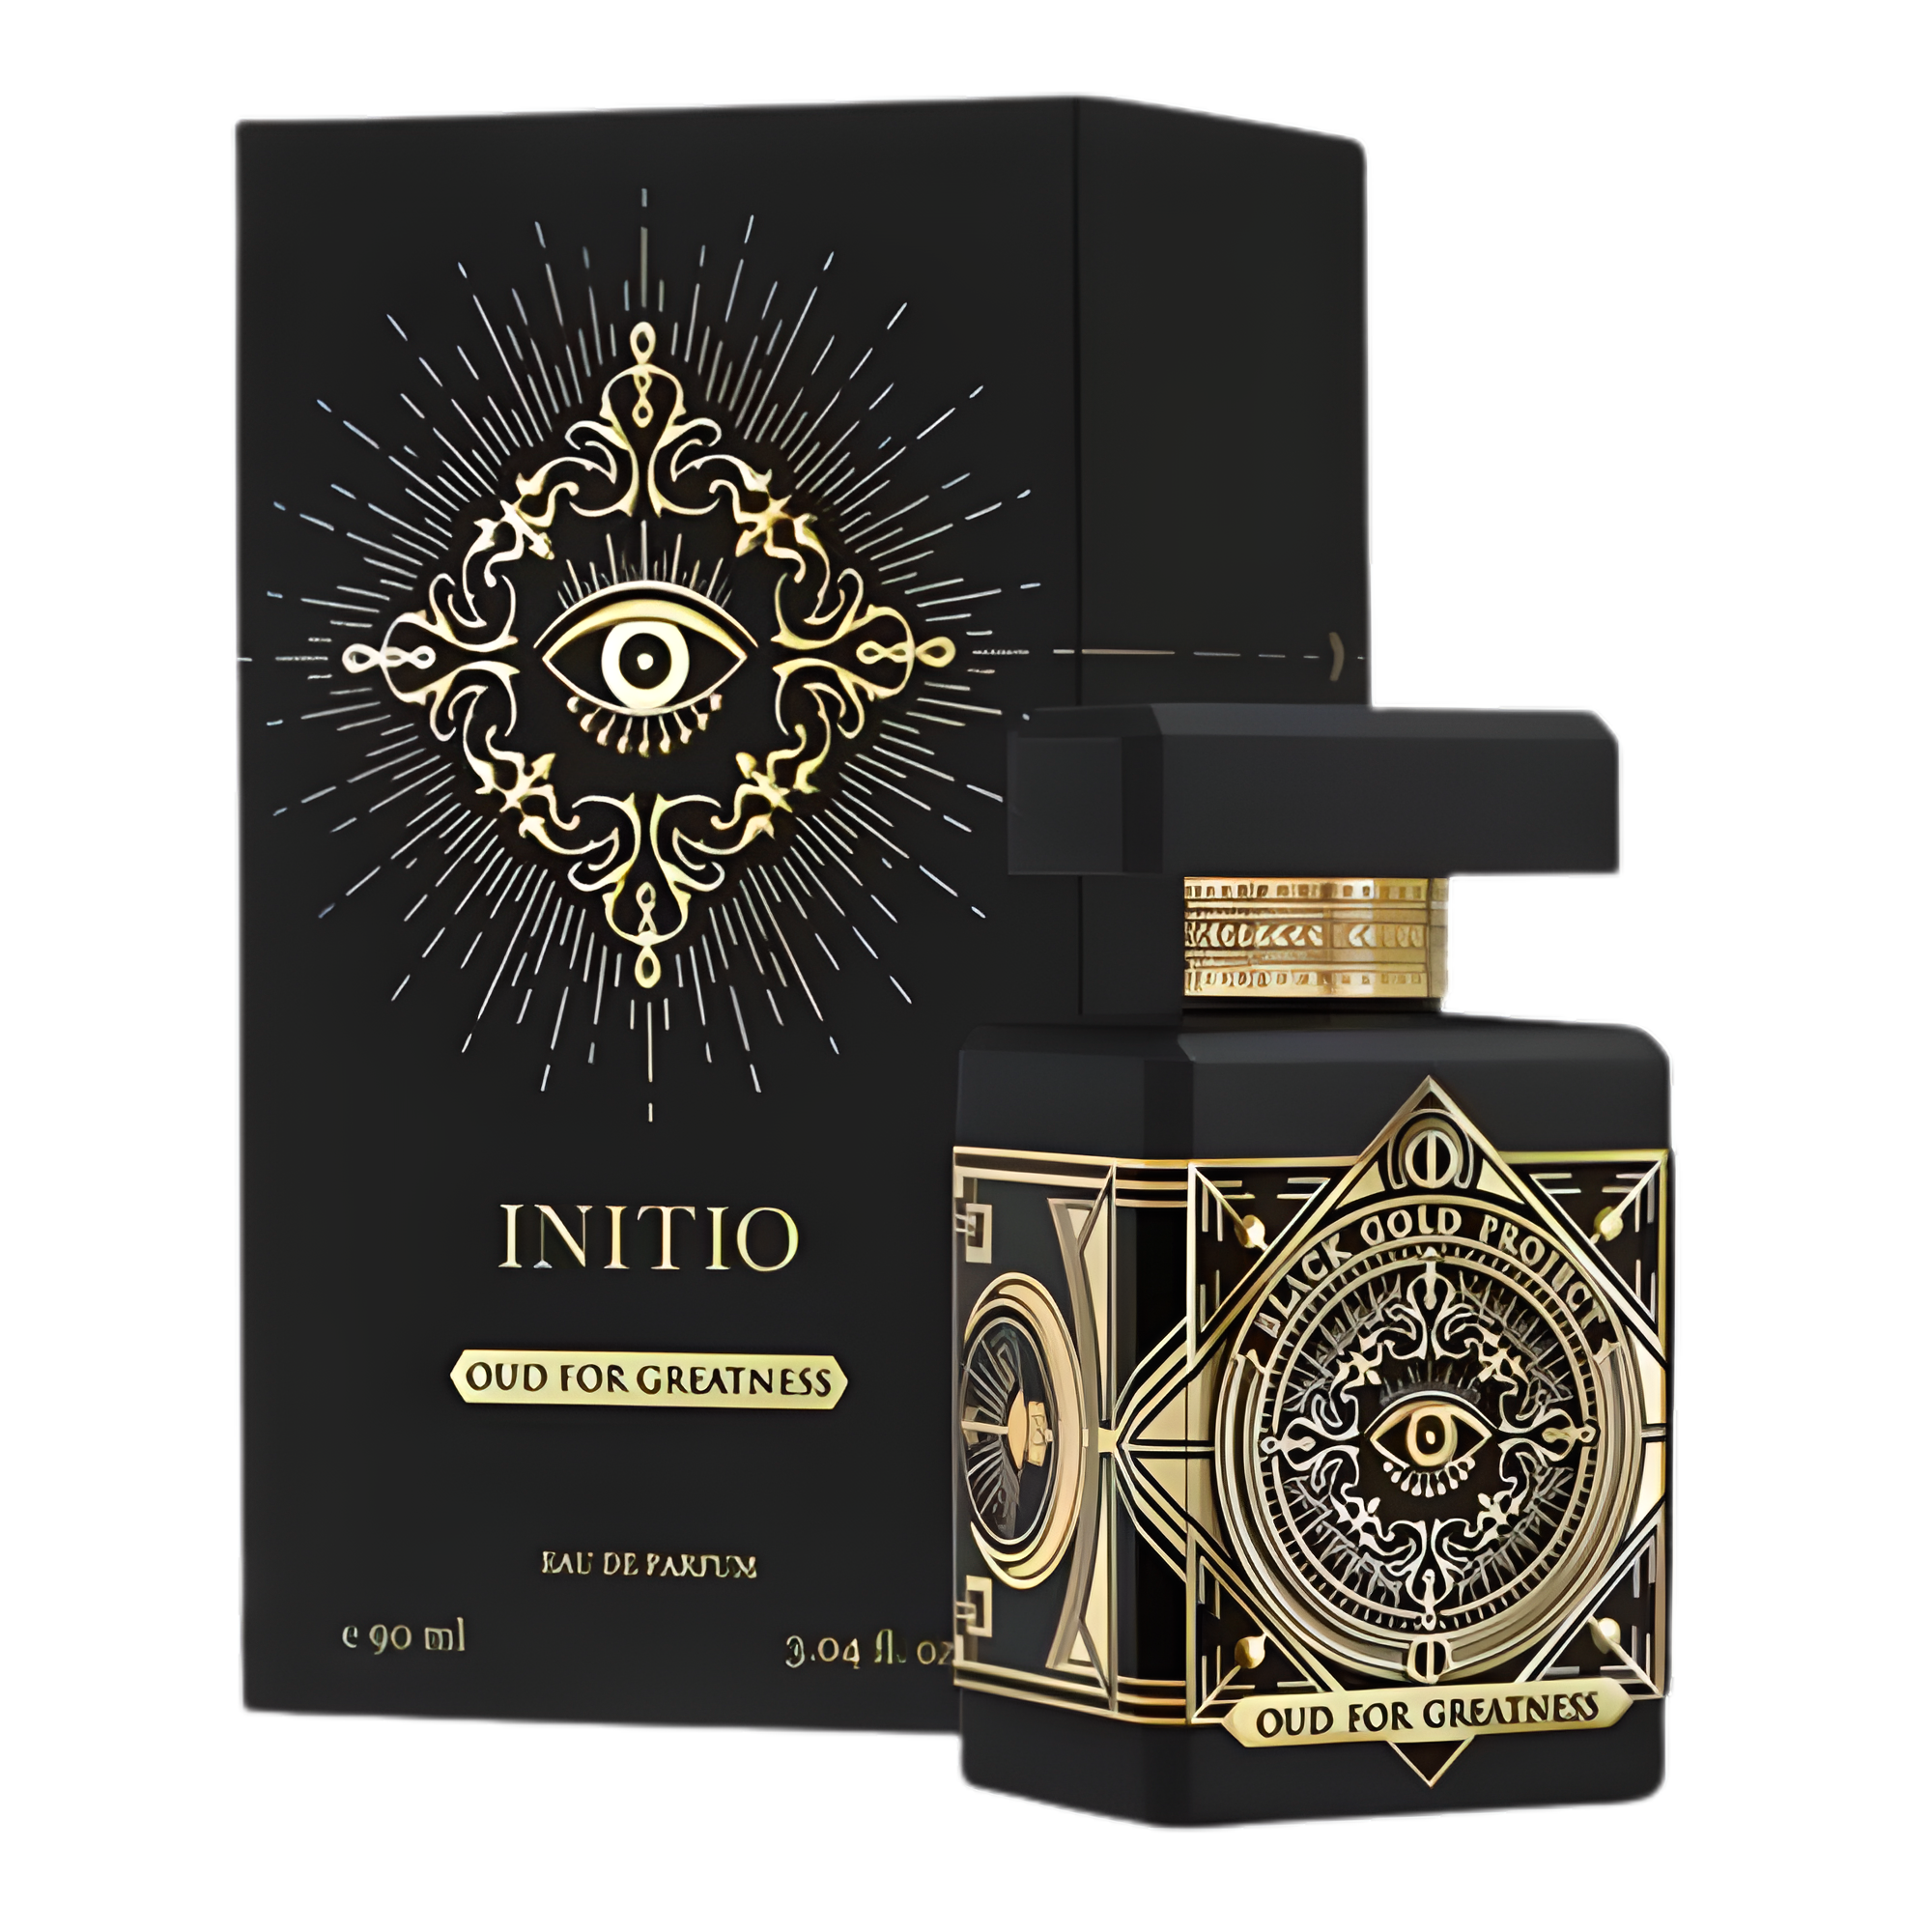 Oud of Greatness Initio